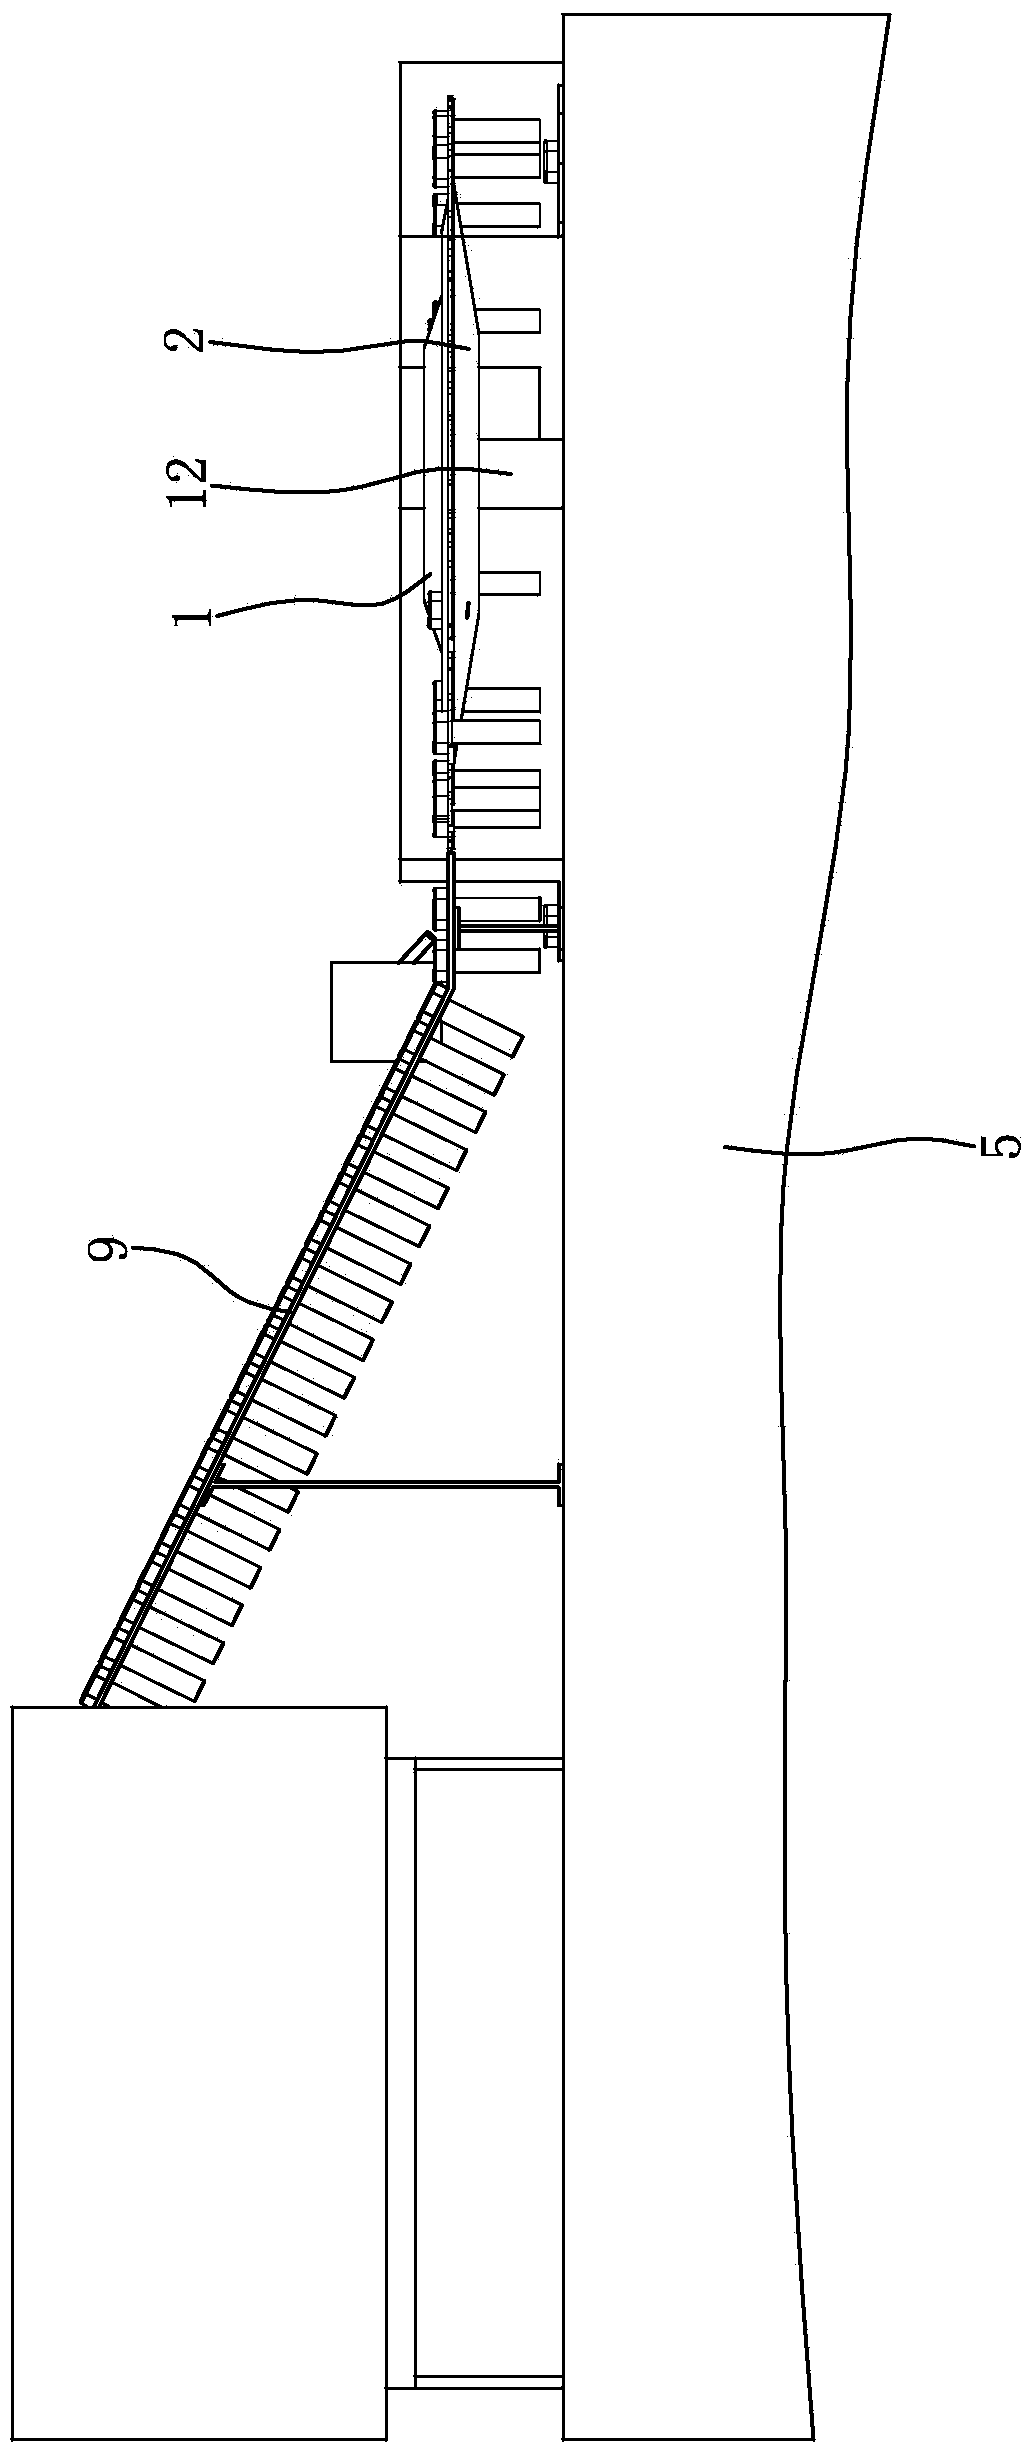 Standard fastener detection conveying and detection device